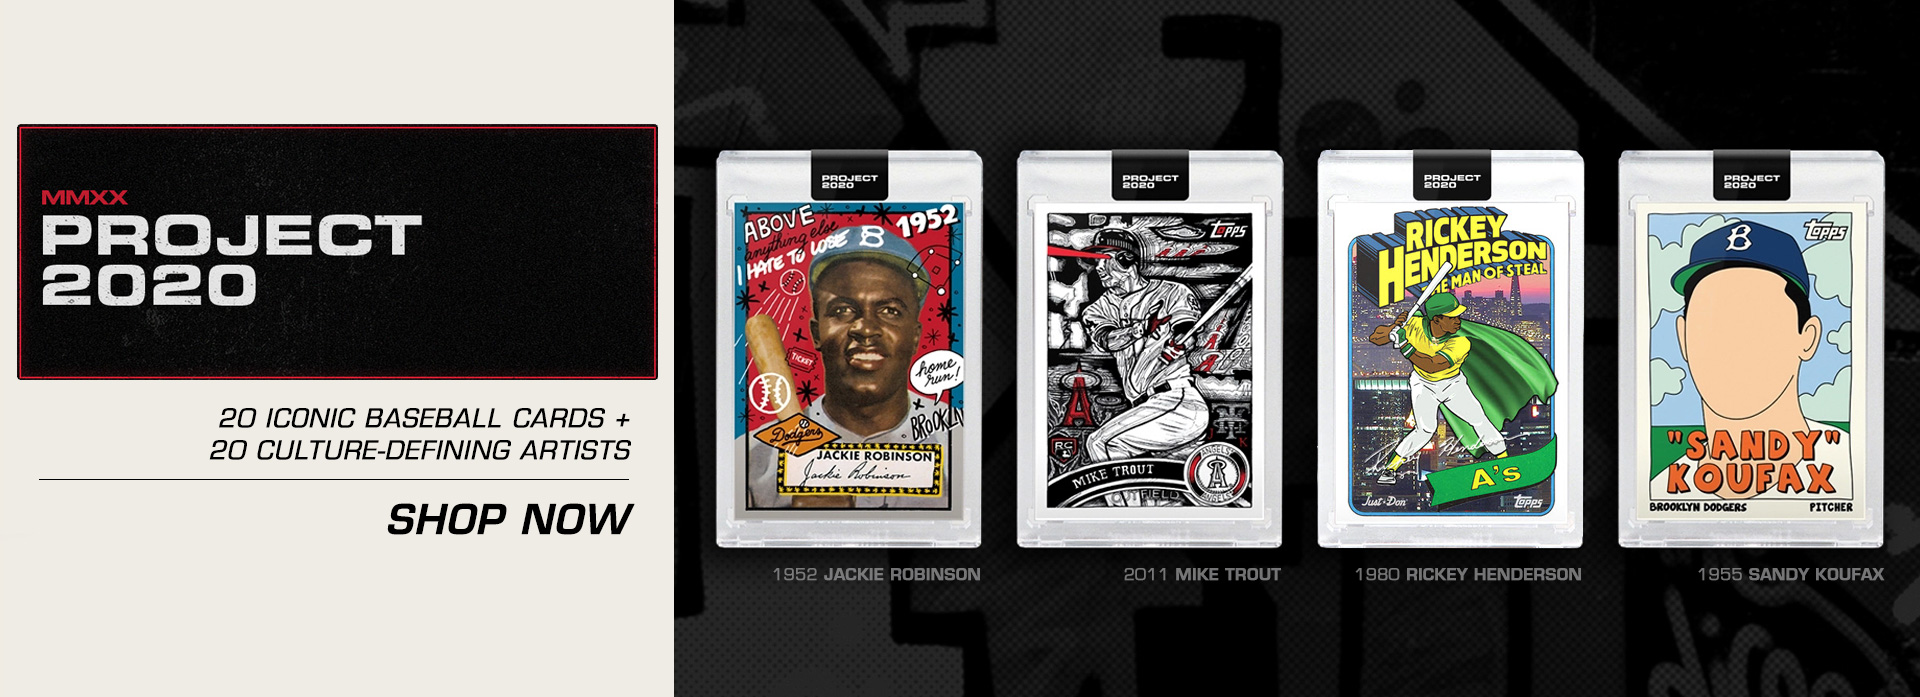 Topps Project 2020 Banner Sample Rotation Cards